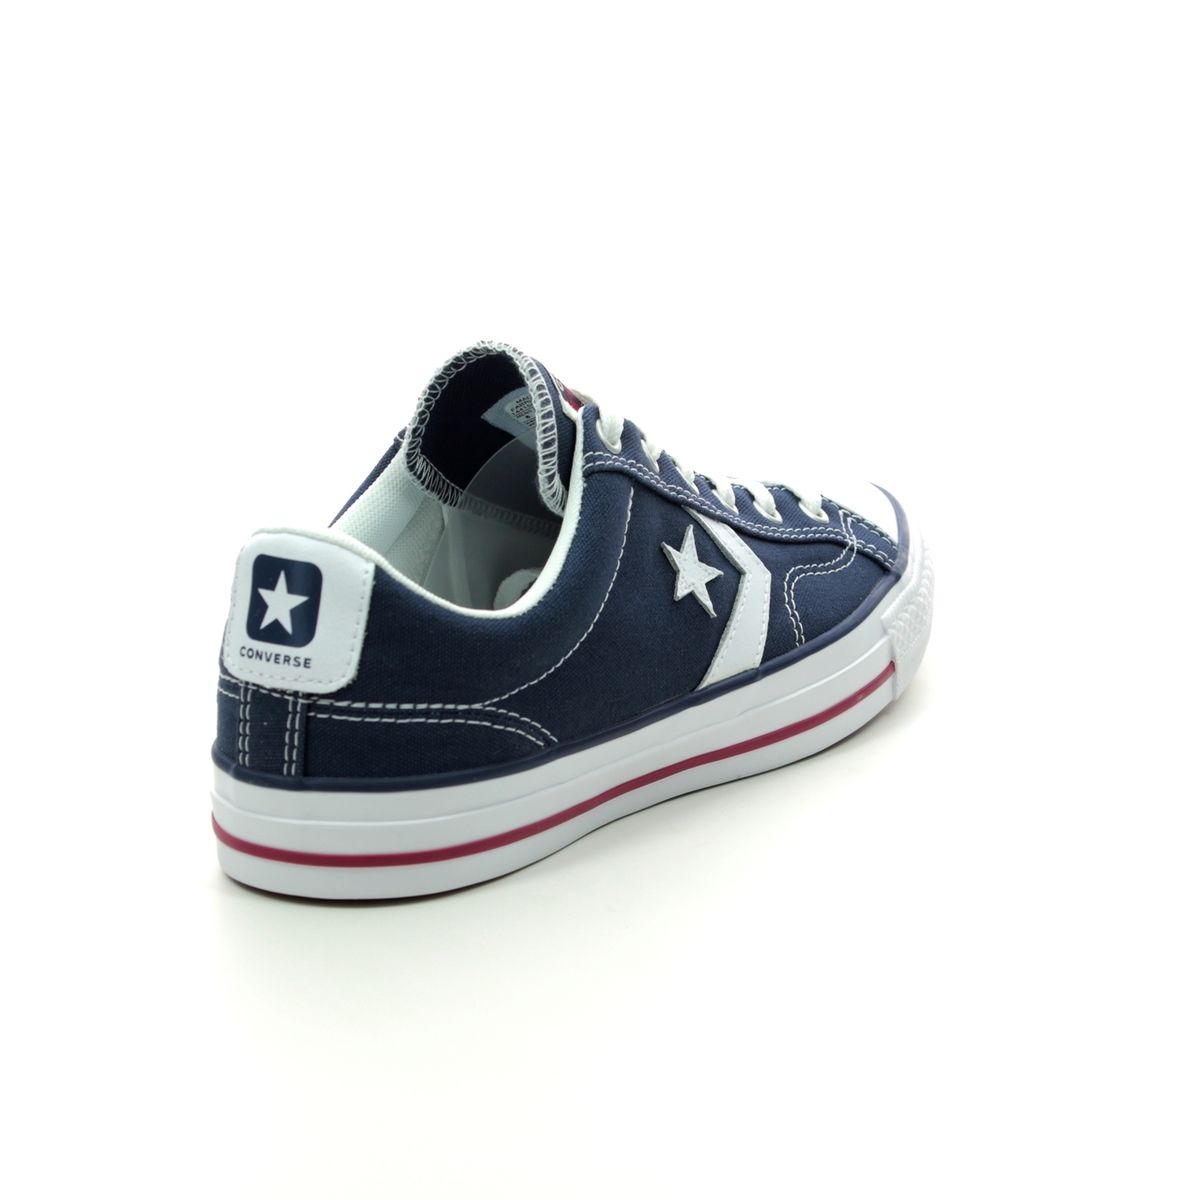 Converse Star Player Ox 144150C Navy trainers